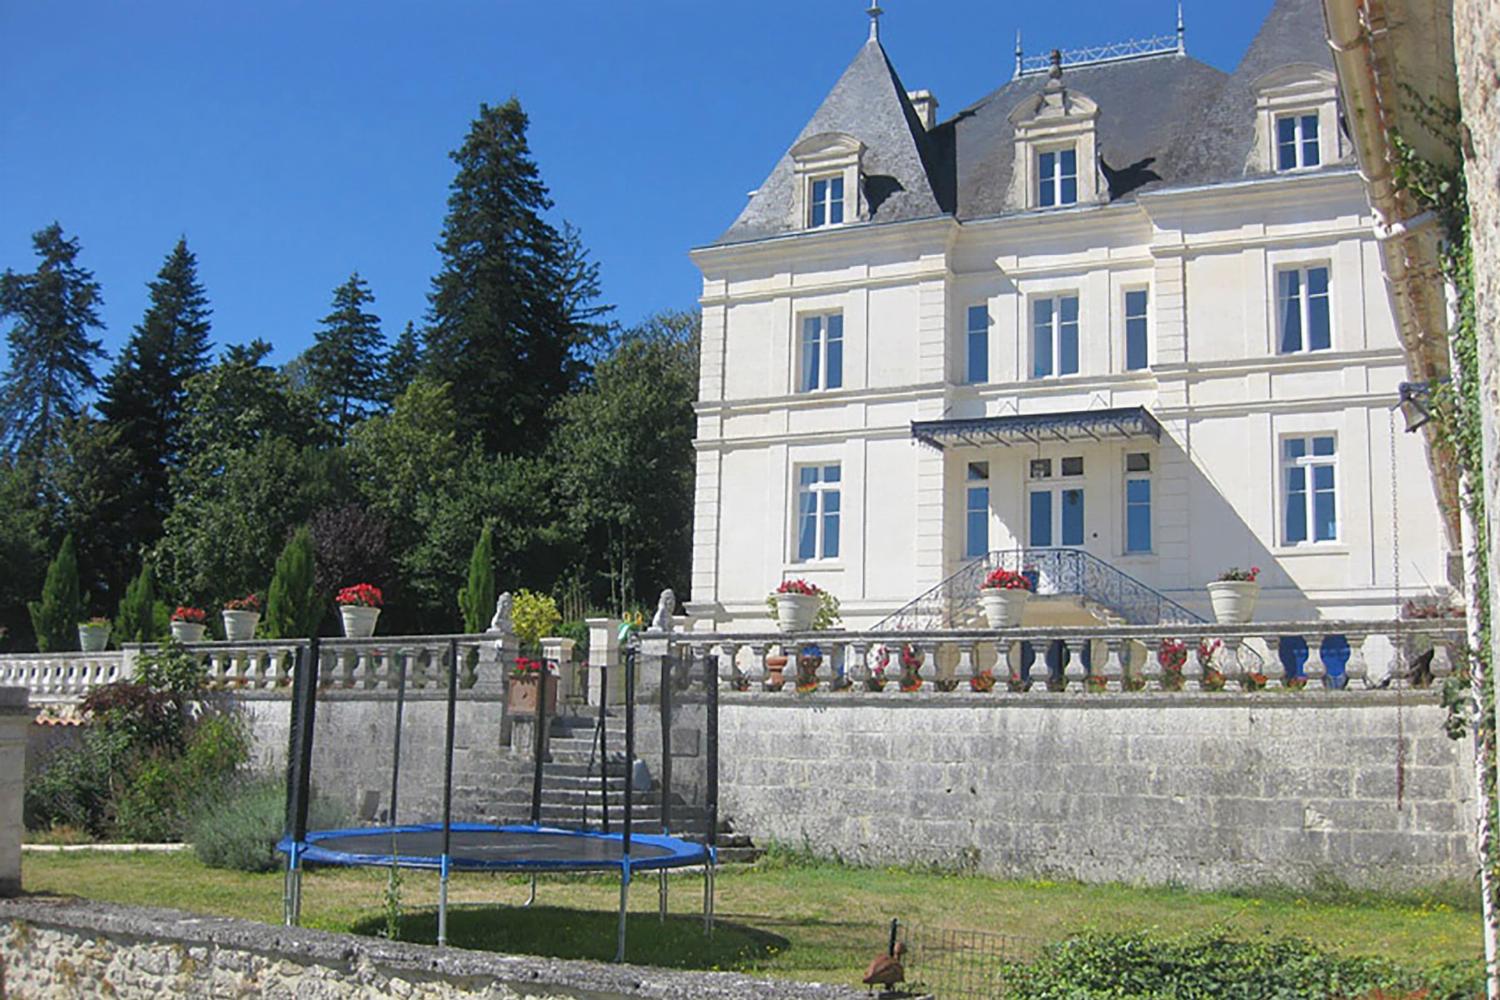 Holiday château in Charente